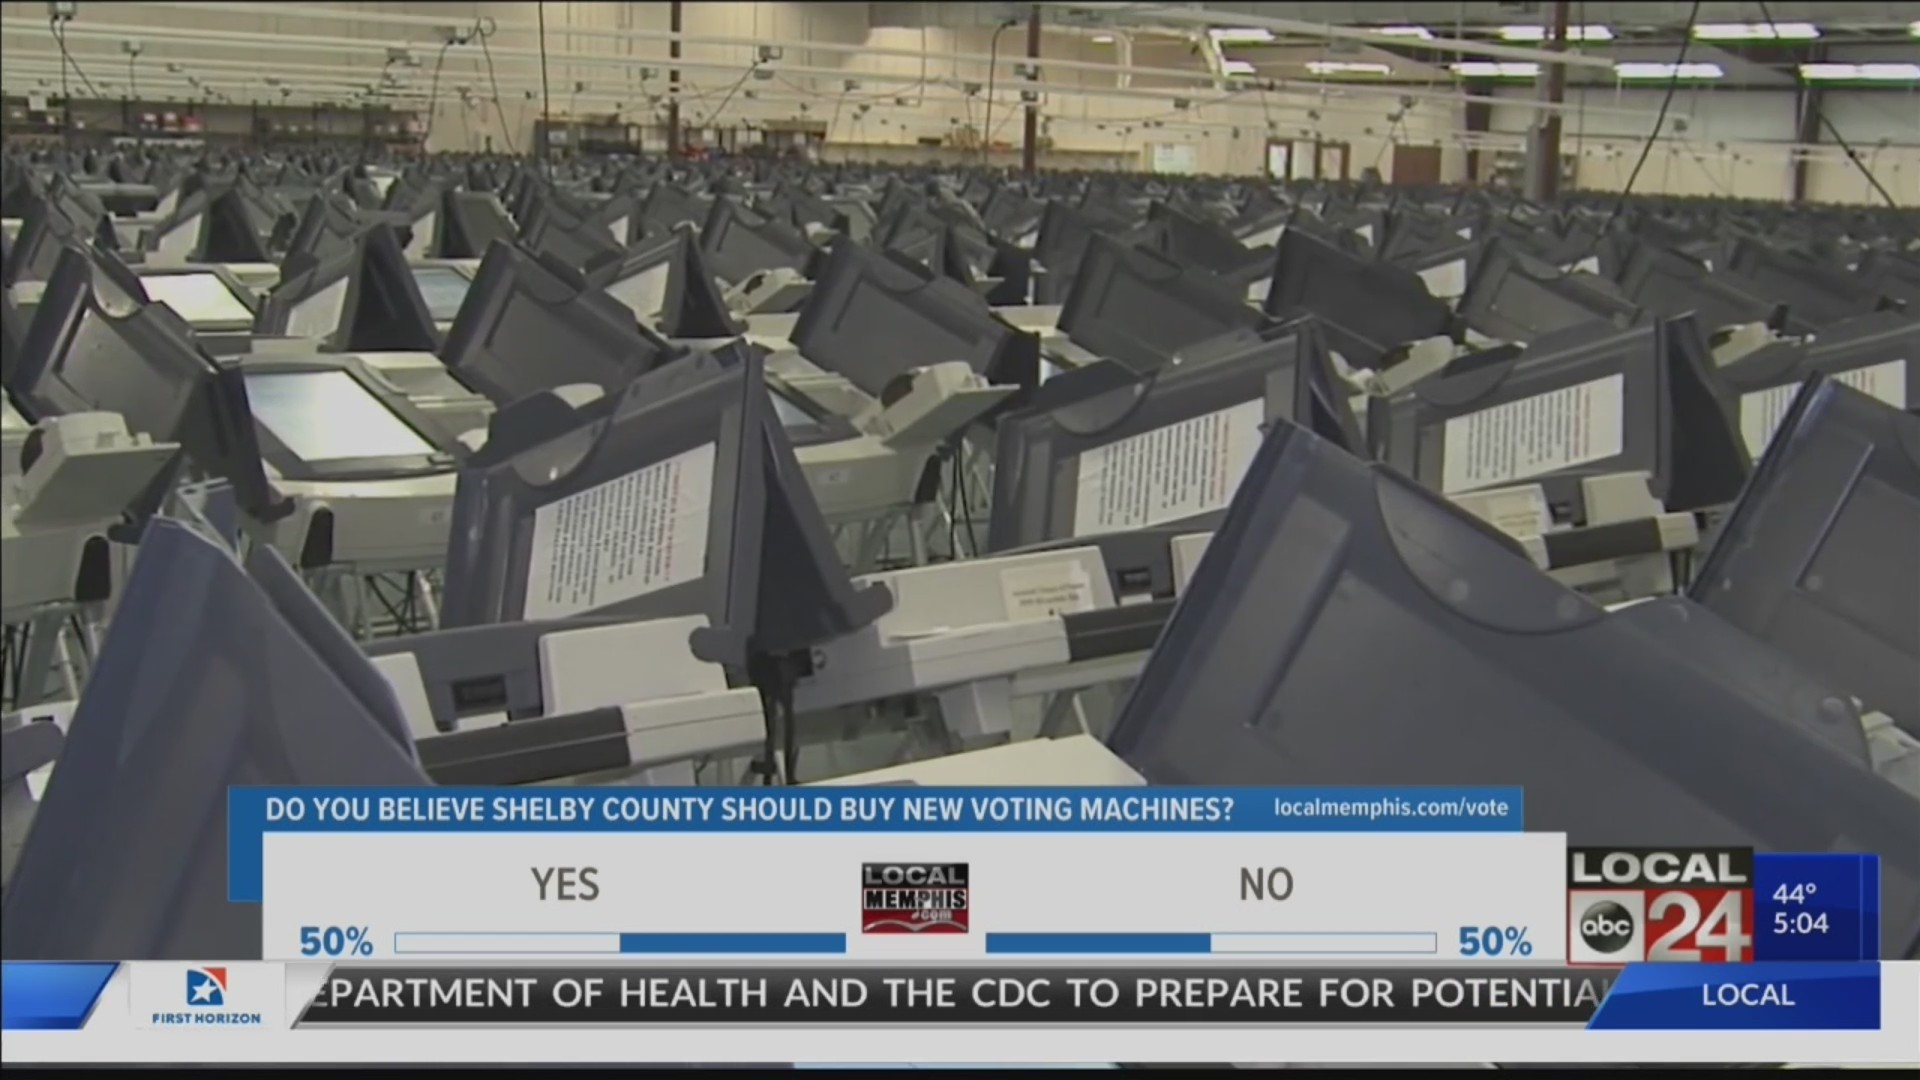 Shelby County leaders scrambling for Plan B after surprise announcement on purchase of new voting machines